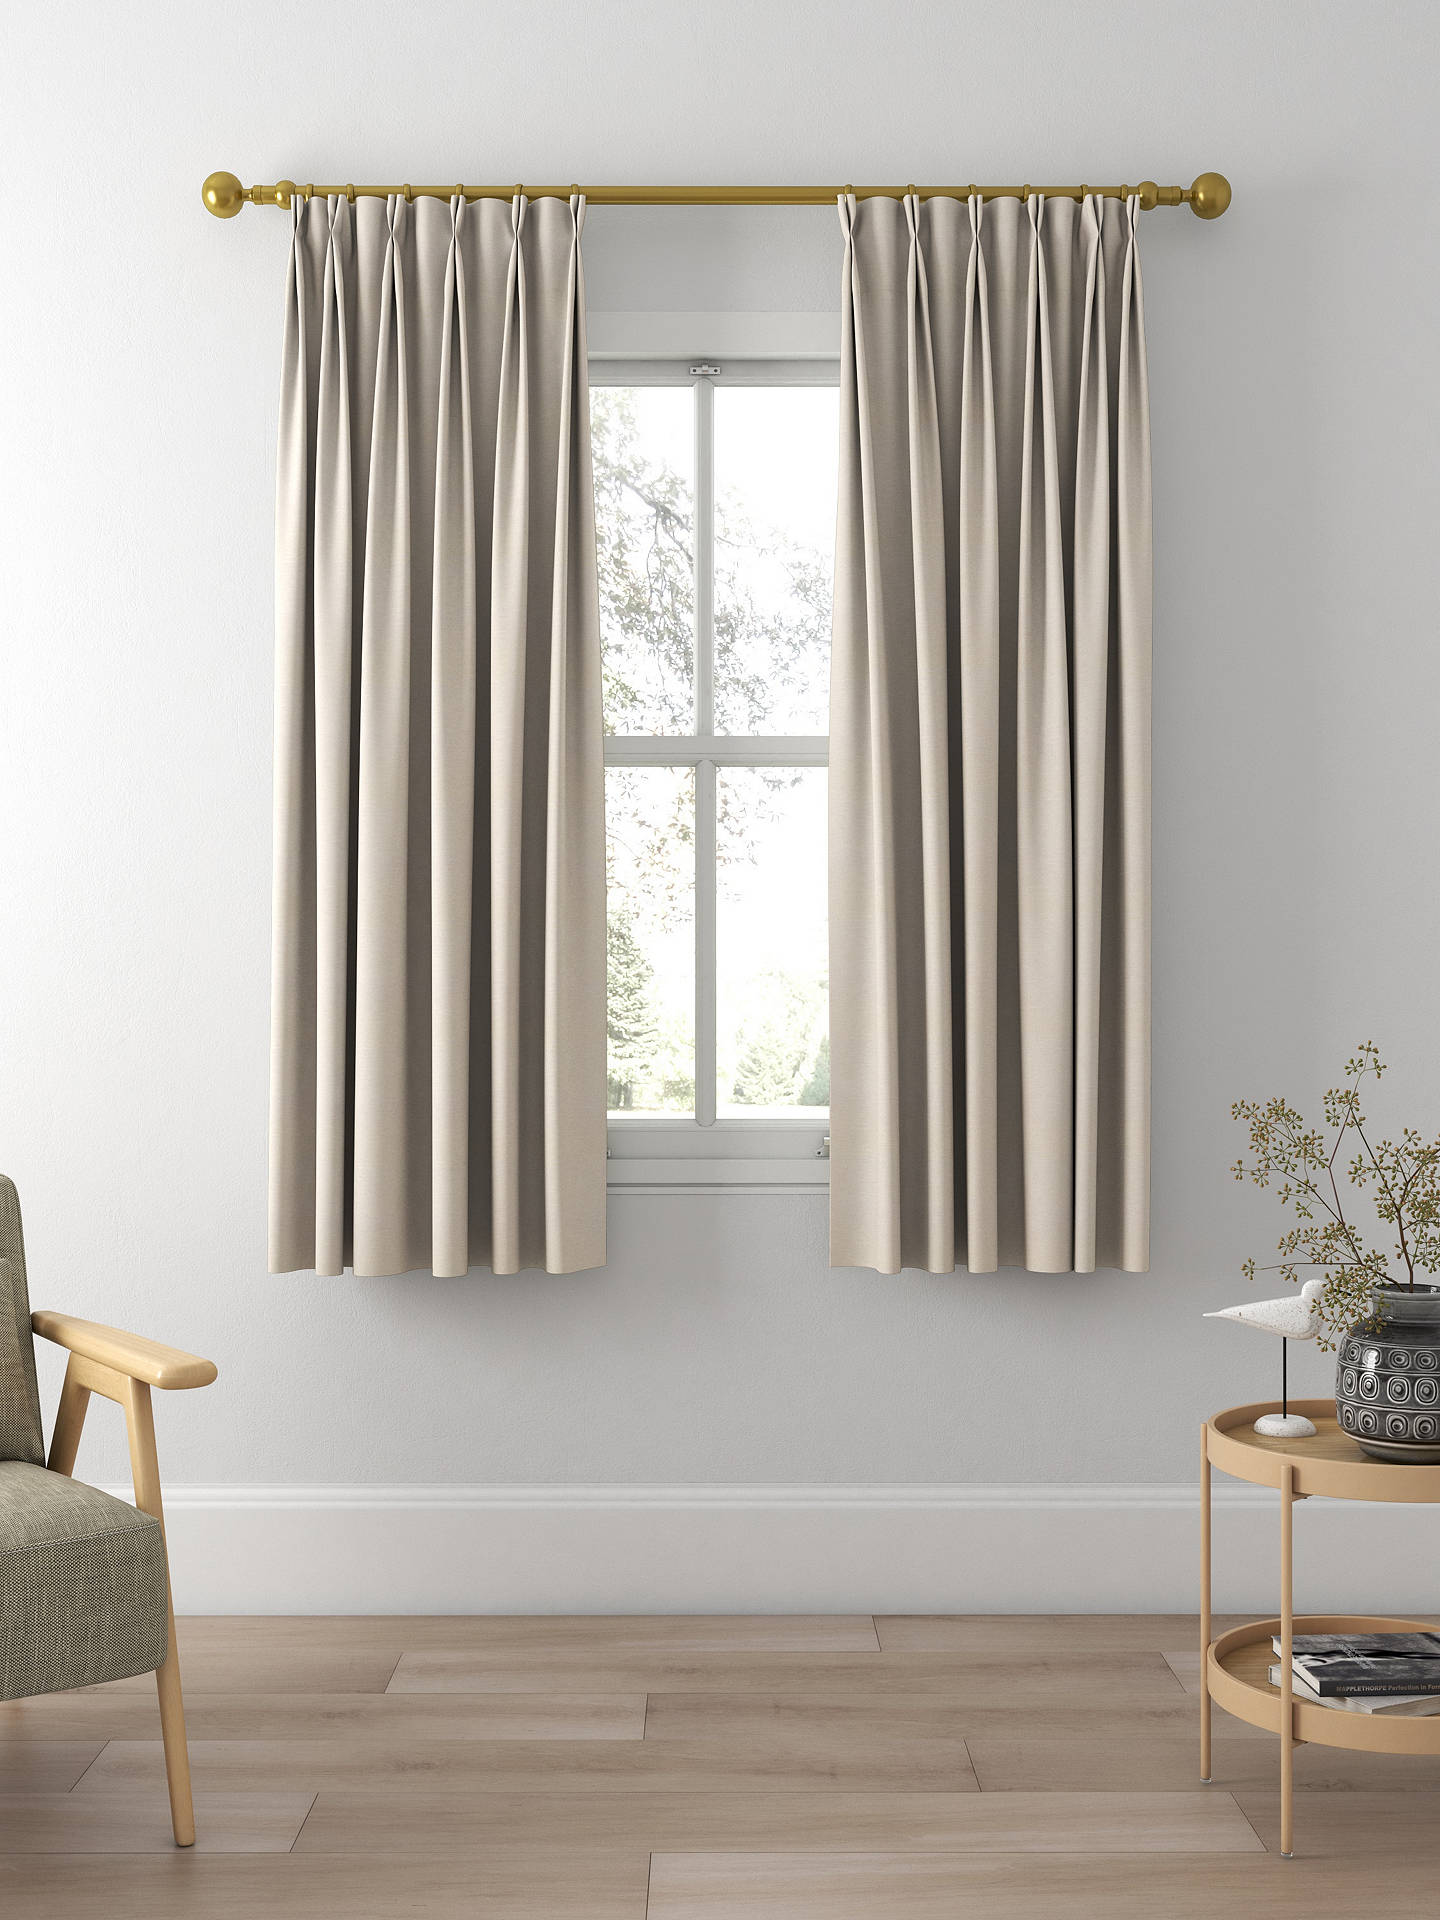 Laura Ashley Swanson Made to Measure Curtains, Oyster